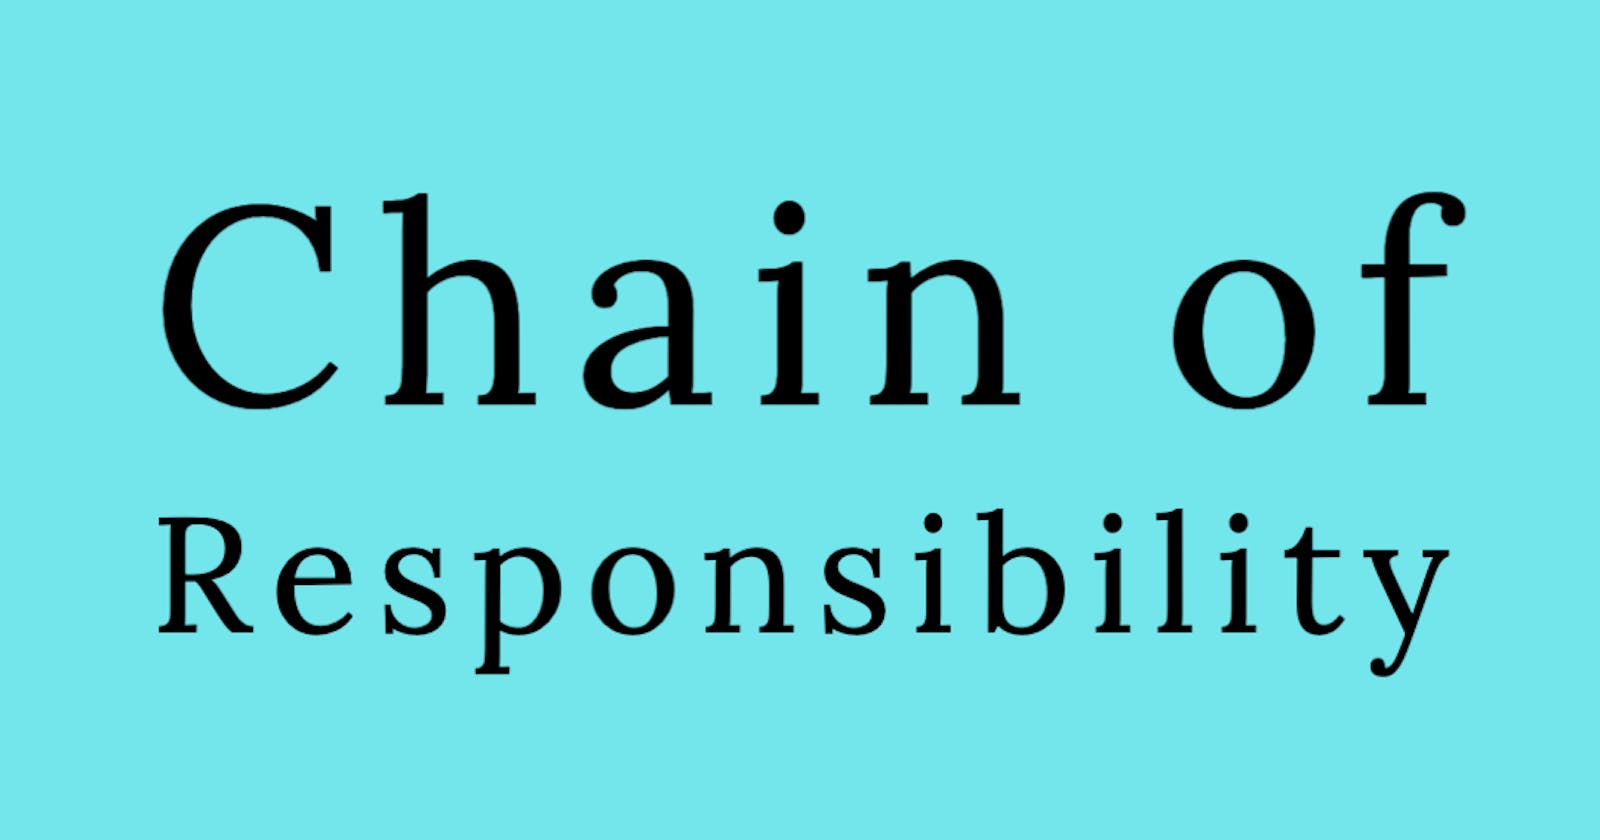 Notes: Go Design Patterns - Chain of Responsibility